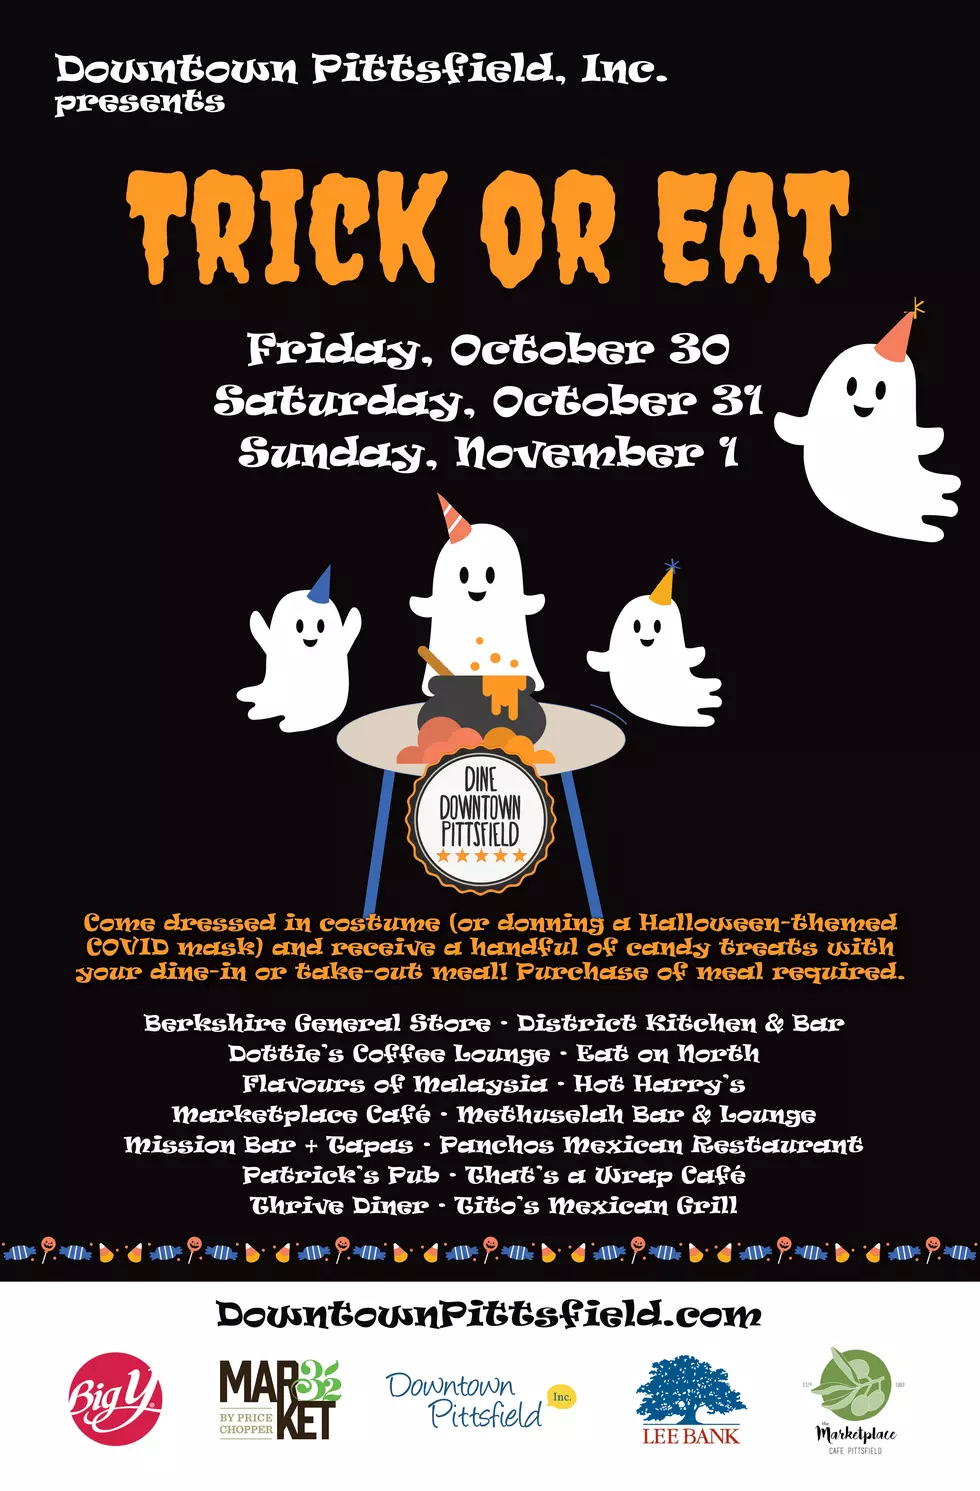 Trick or Eat Event Set for Halloween Weekend